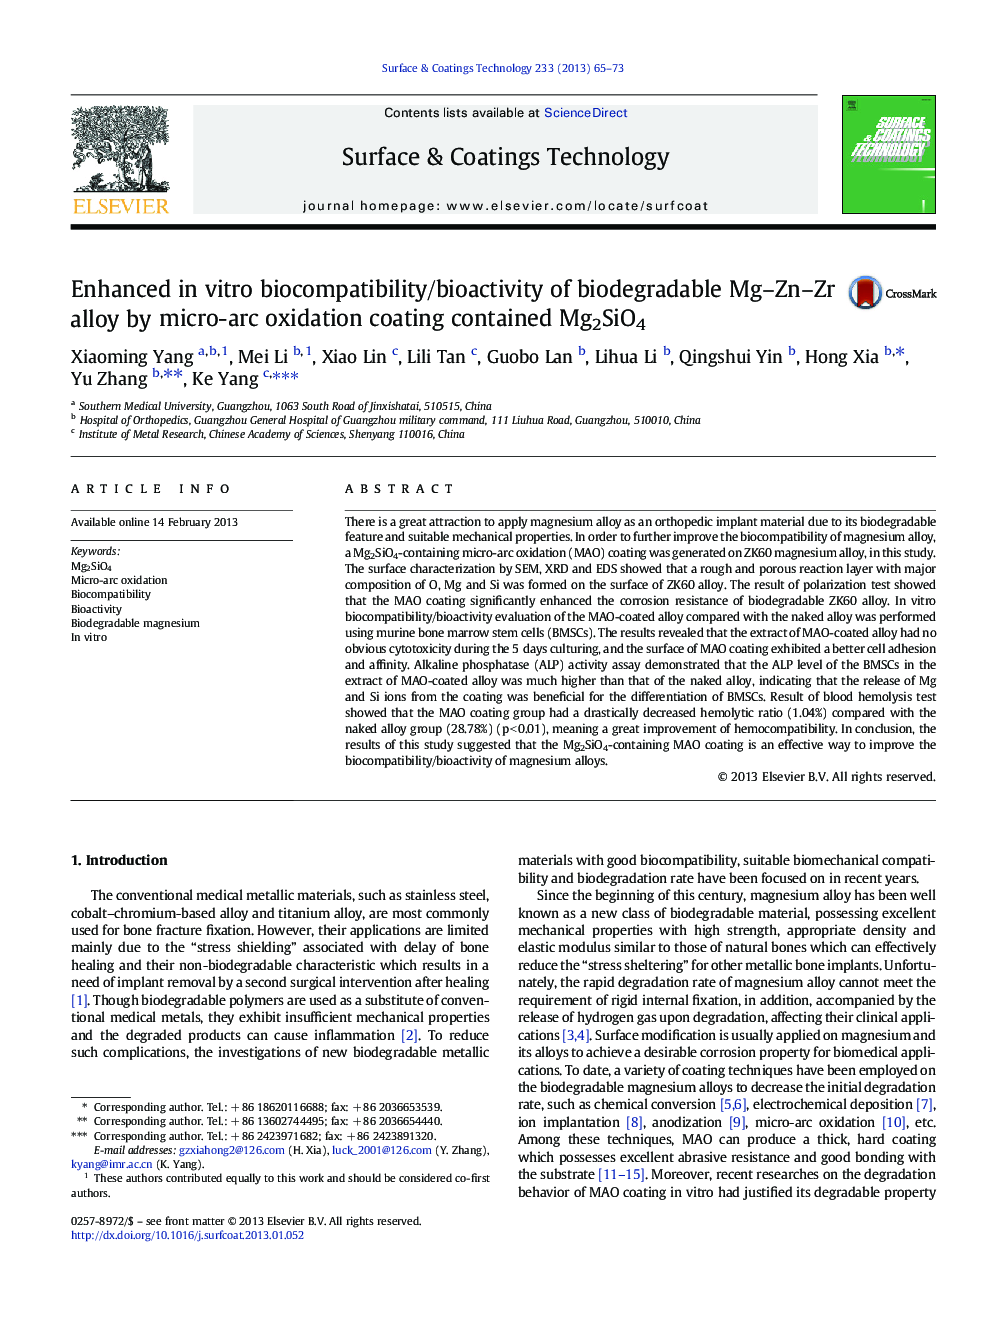 Enhanced in vitro biocompatibility/bioactivity of biodegradable Mg-Zn-Zr alloy by micro-arc oxidation coating contained Mg2SiO4